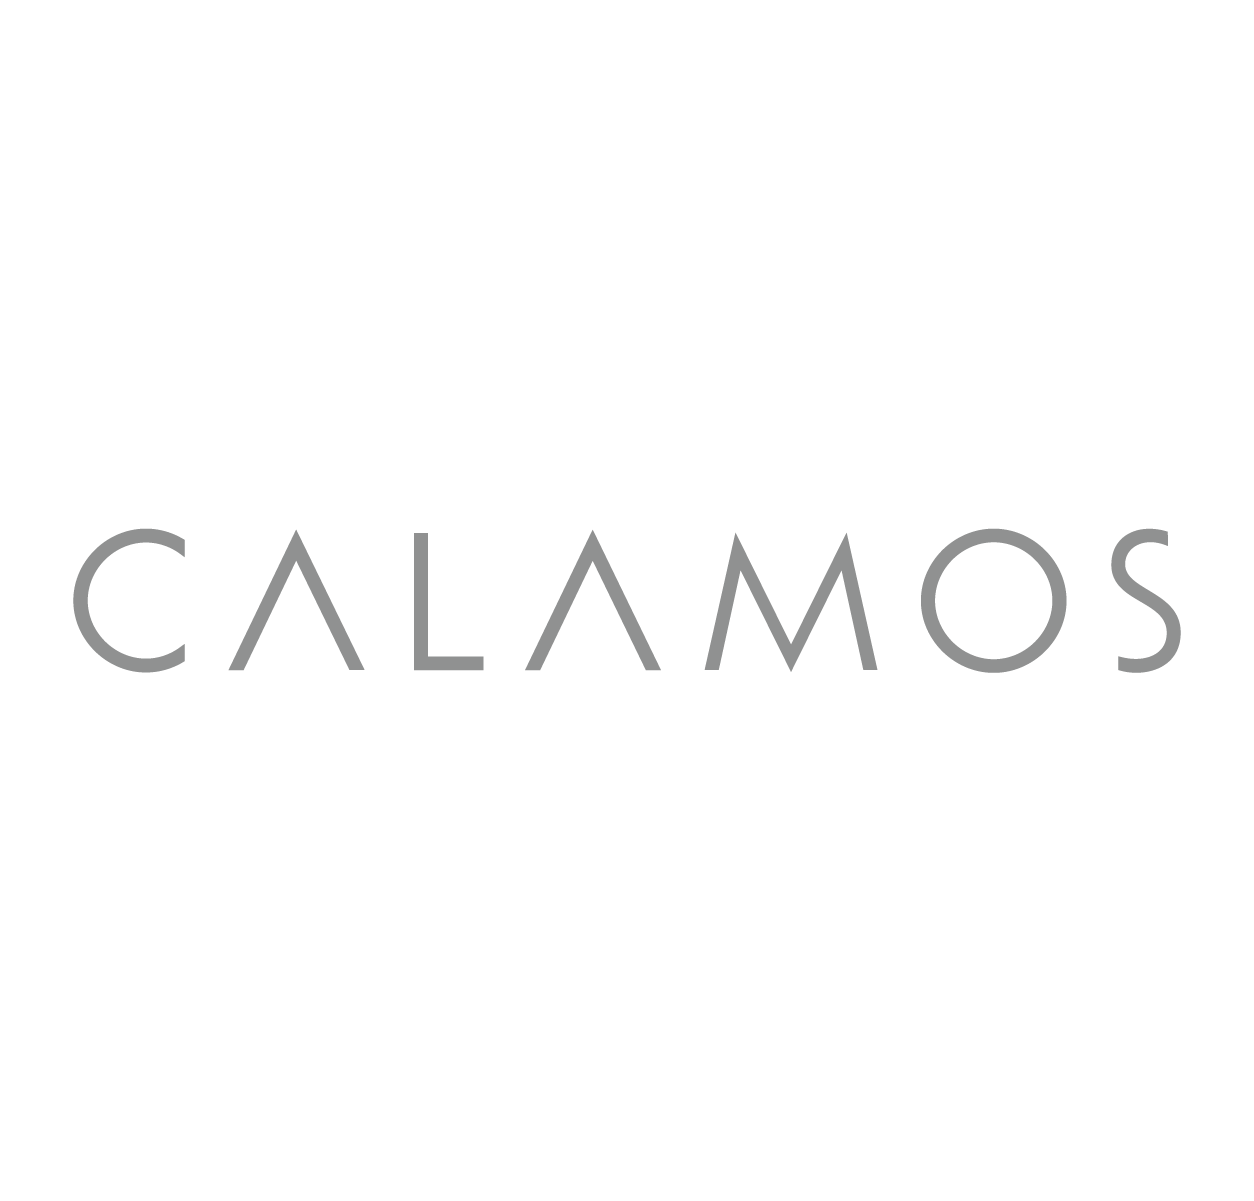 Project image 1 for Identity, Calamos Investments 